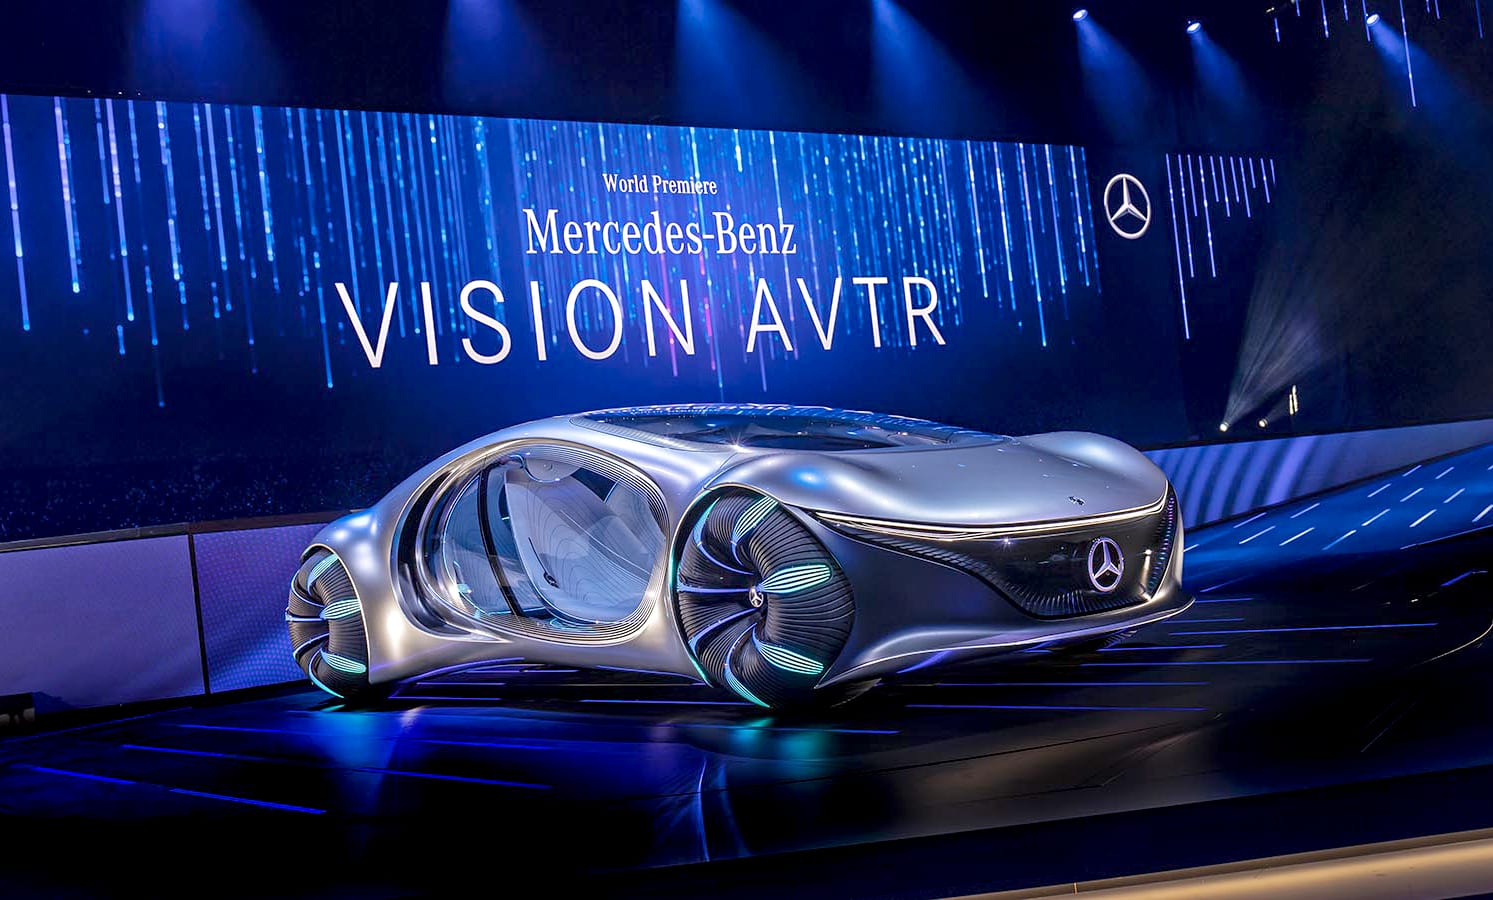 James Camerons Avatar comes to life in Mercedes sleek concept car